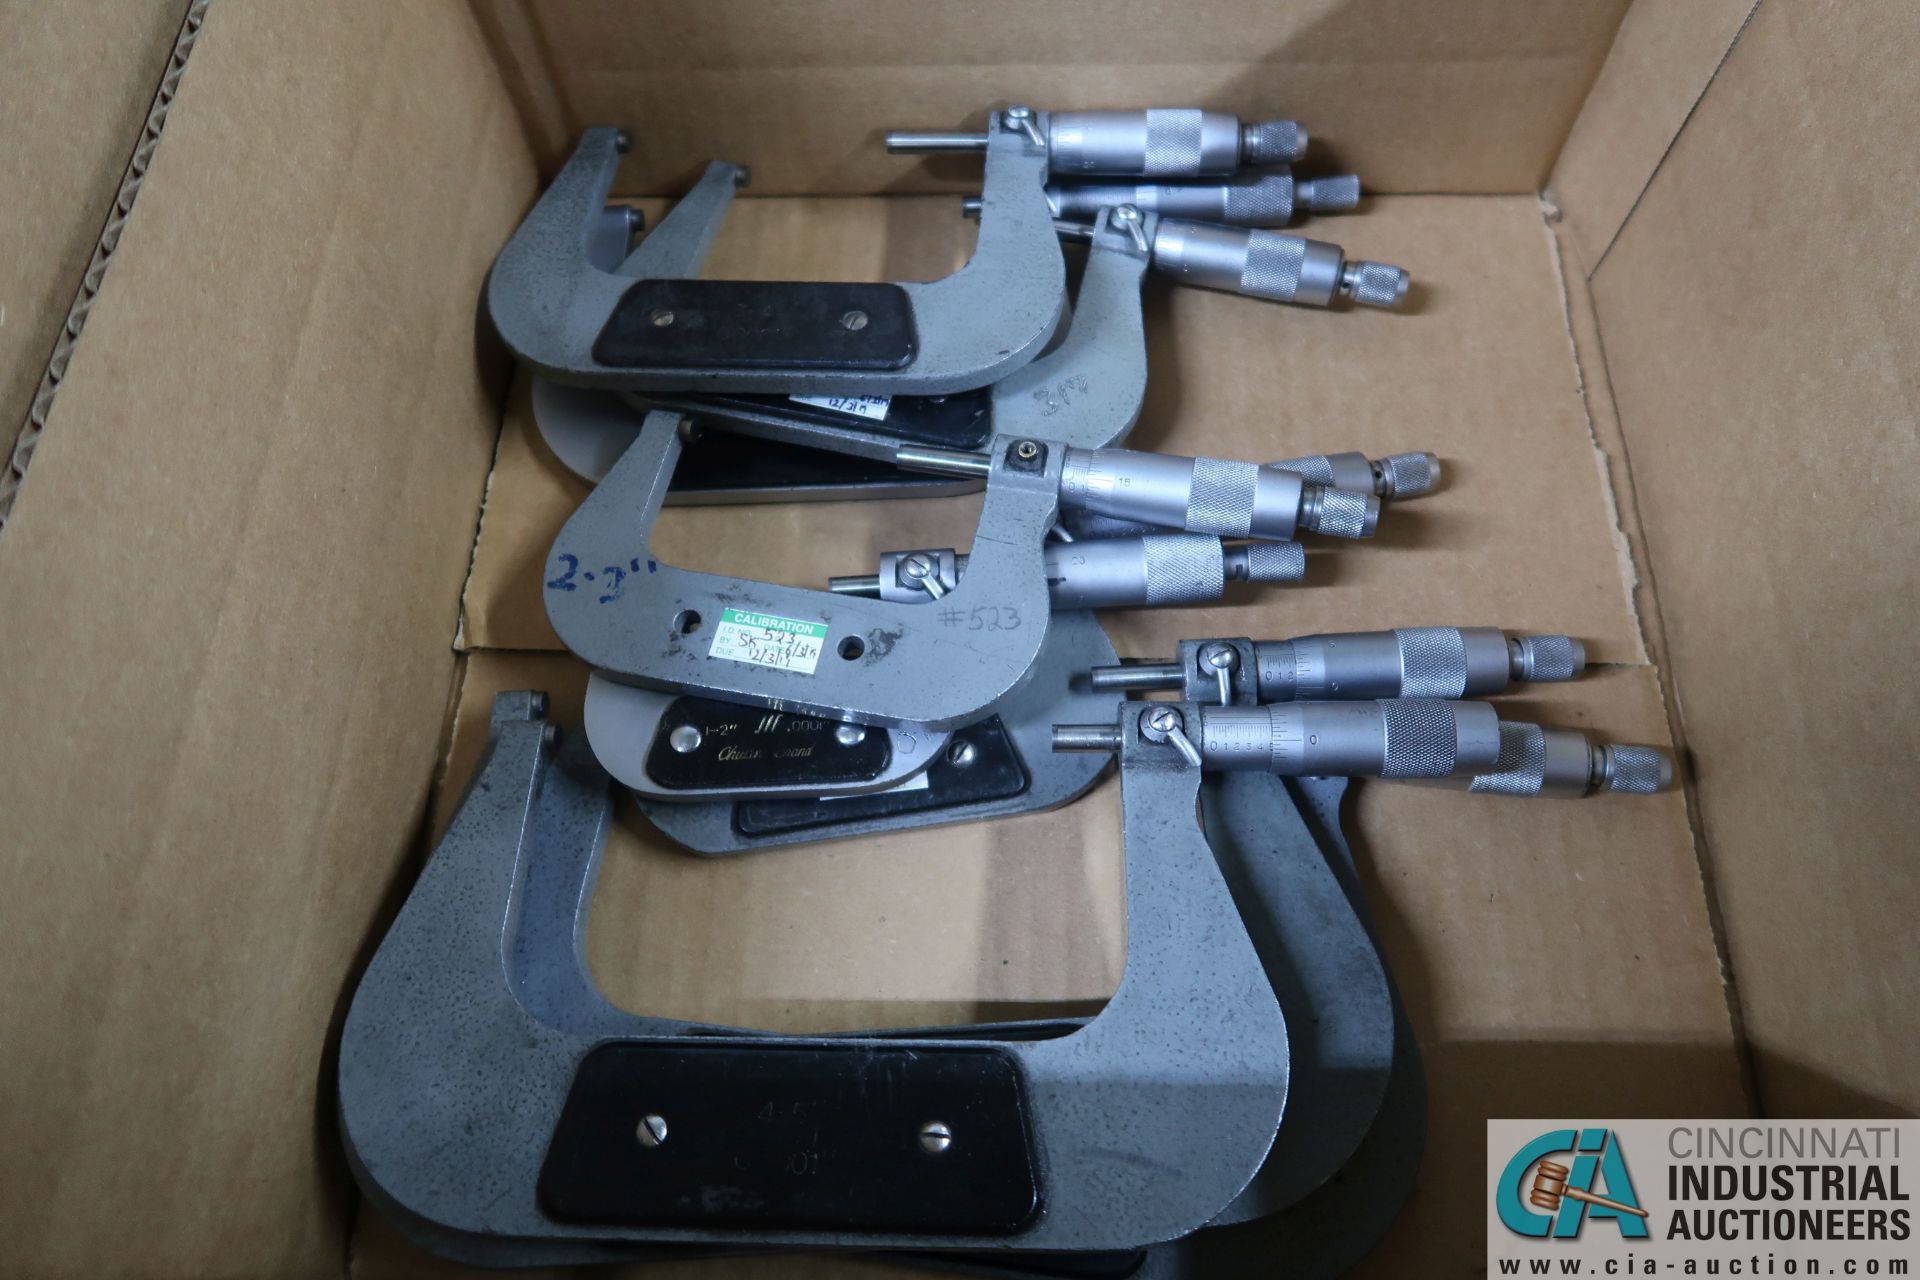 MISCELLANEOUS SIZE MICROMETERS FROM 6" - 1"